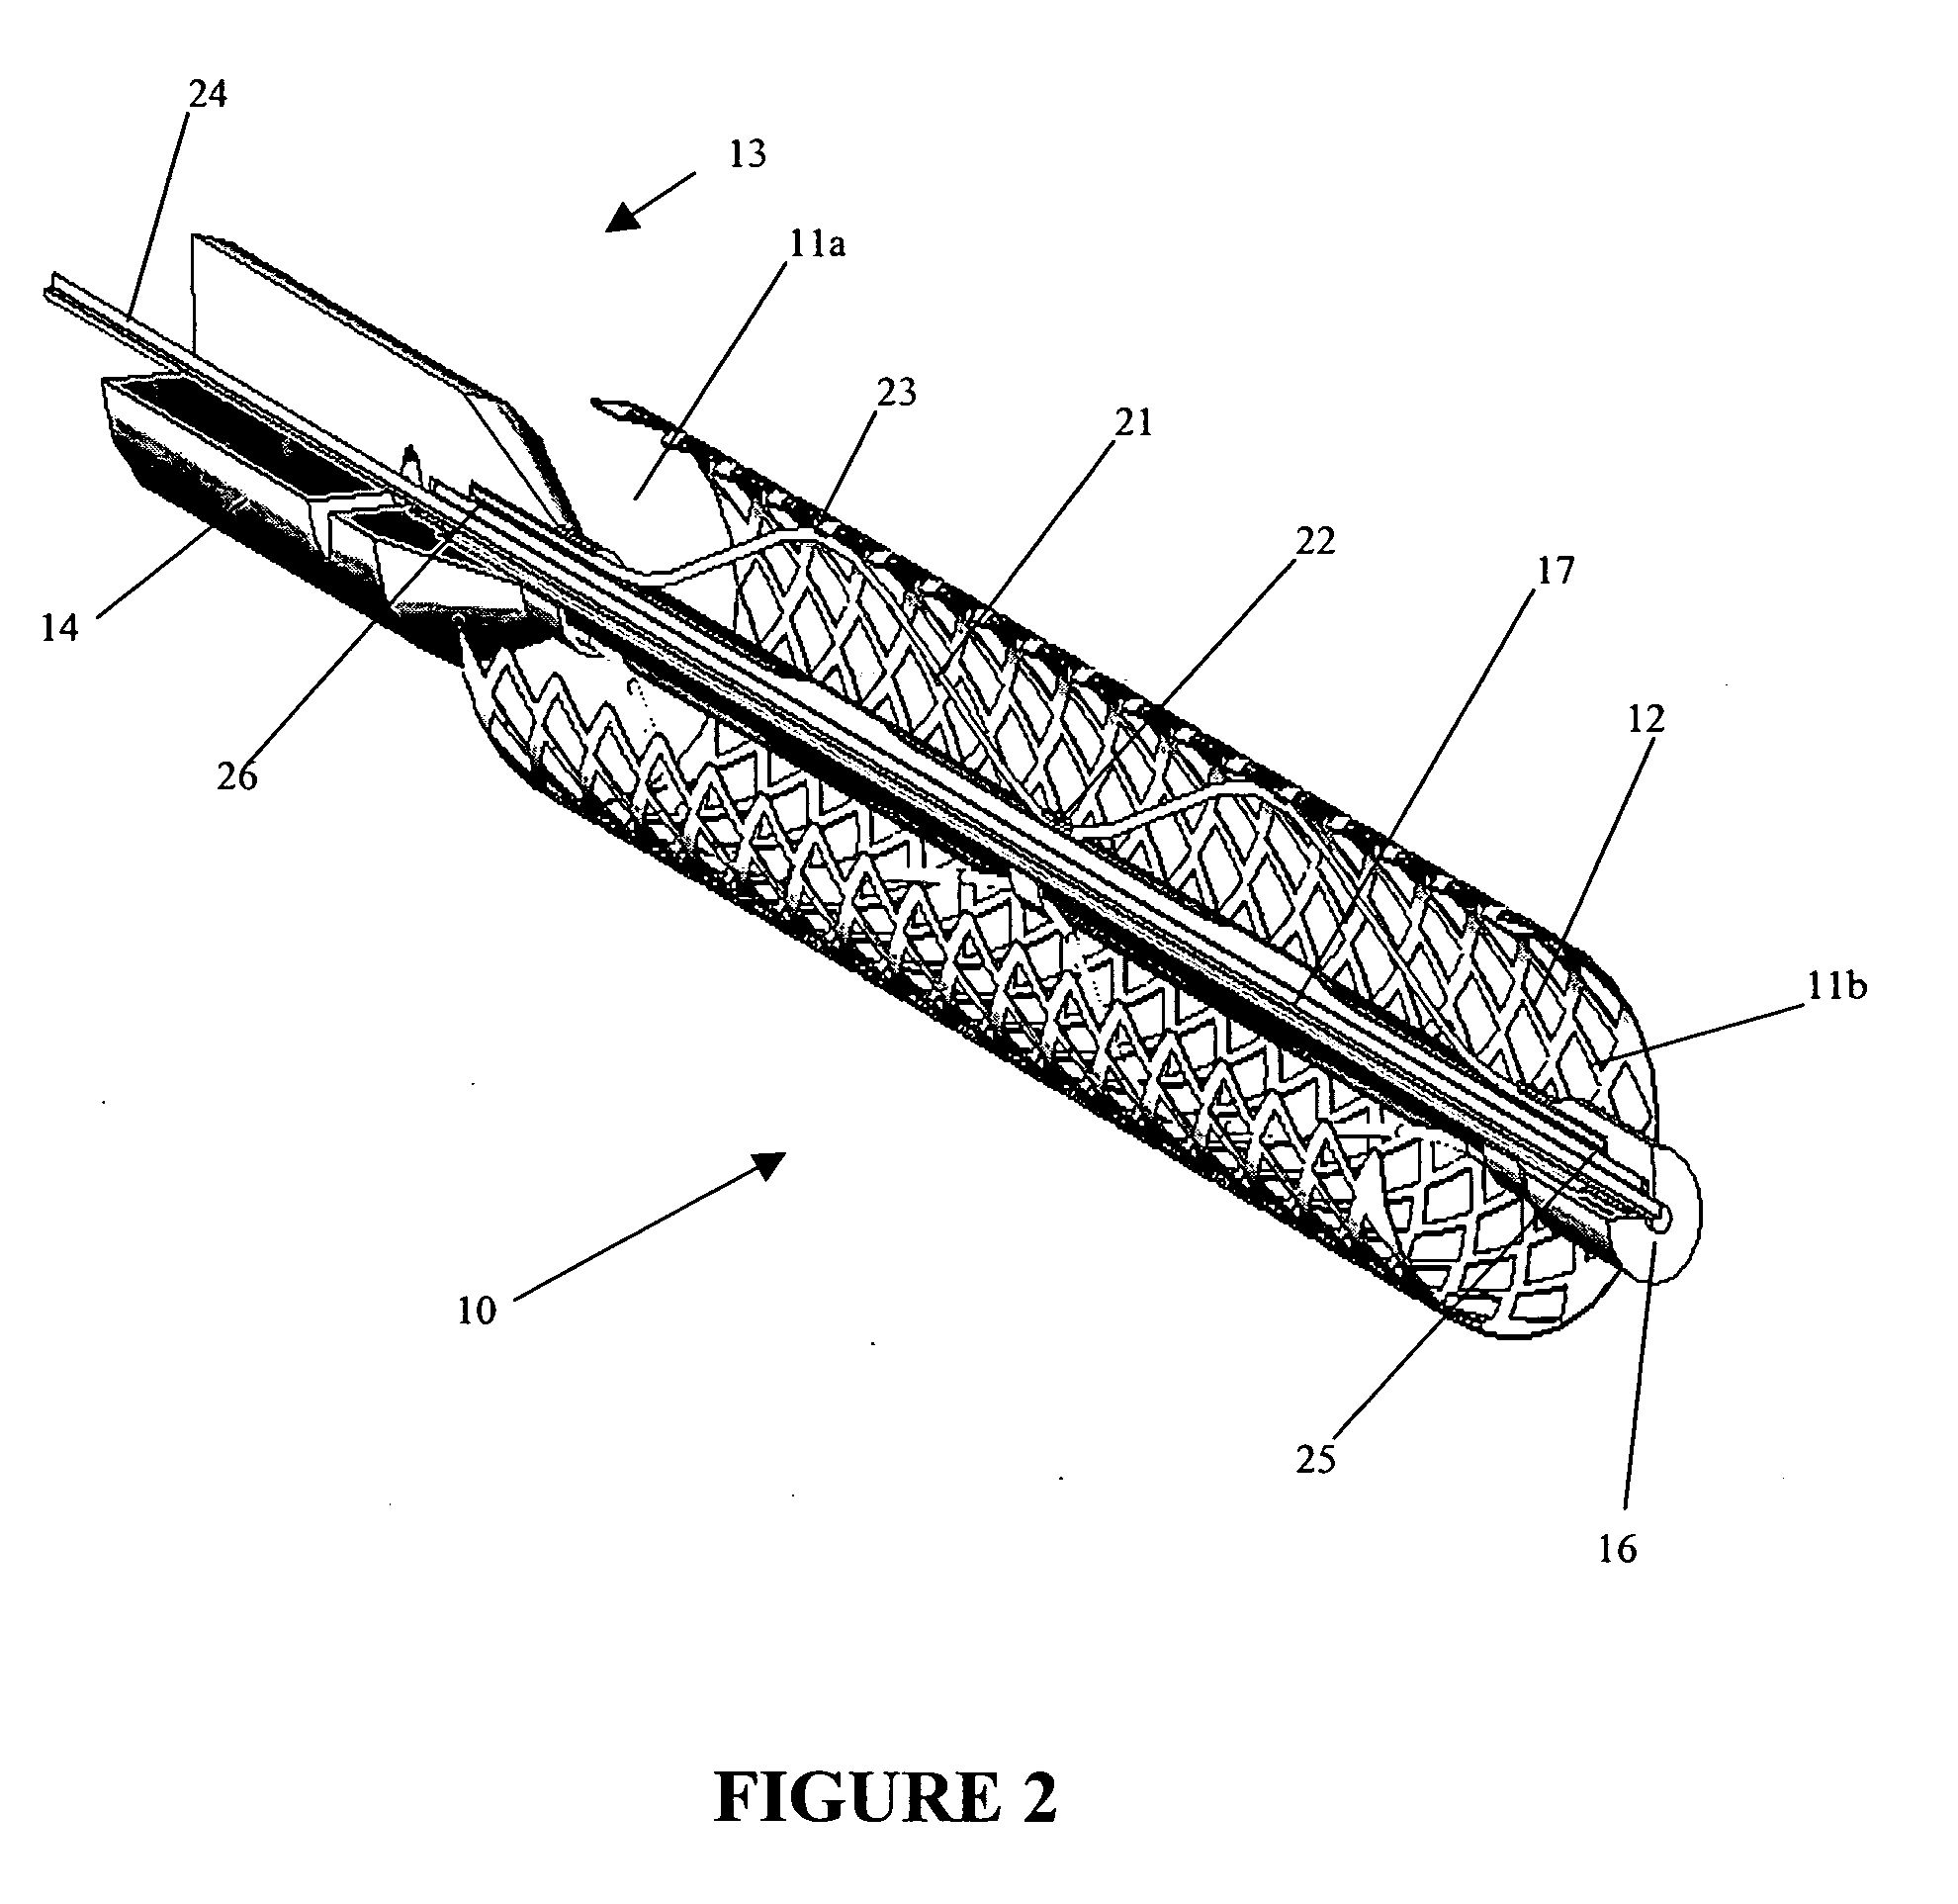 Clamping fixture for coating stents, system using the fixture, and method of using the fixture